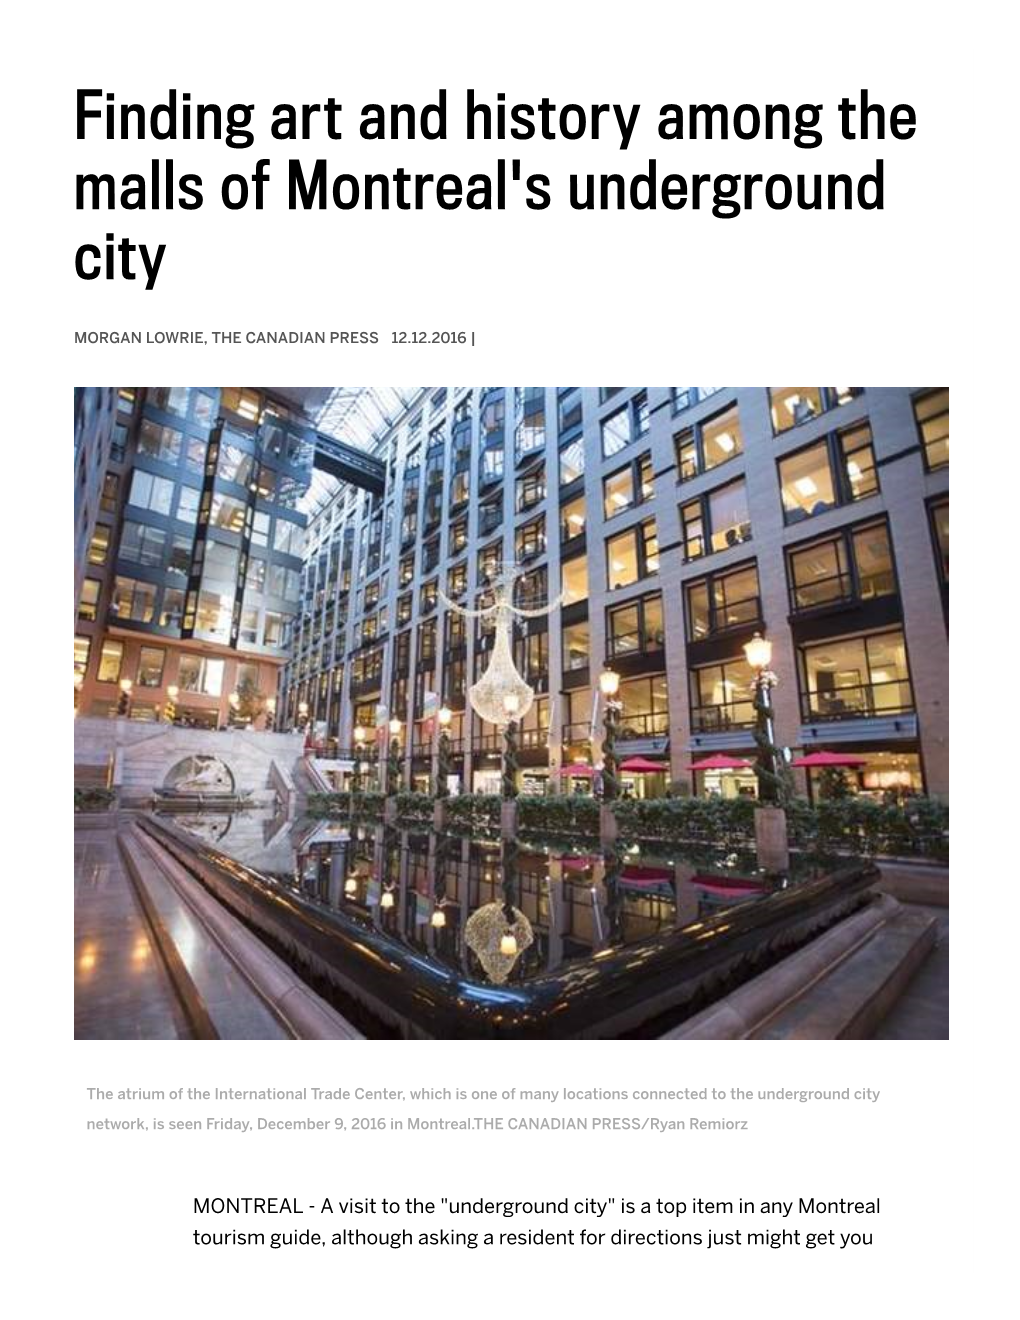 Finding Art and History Among the Malls of Montreal's Underground City